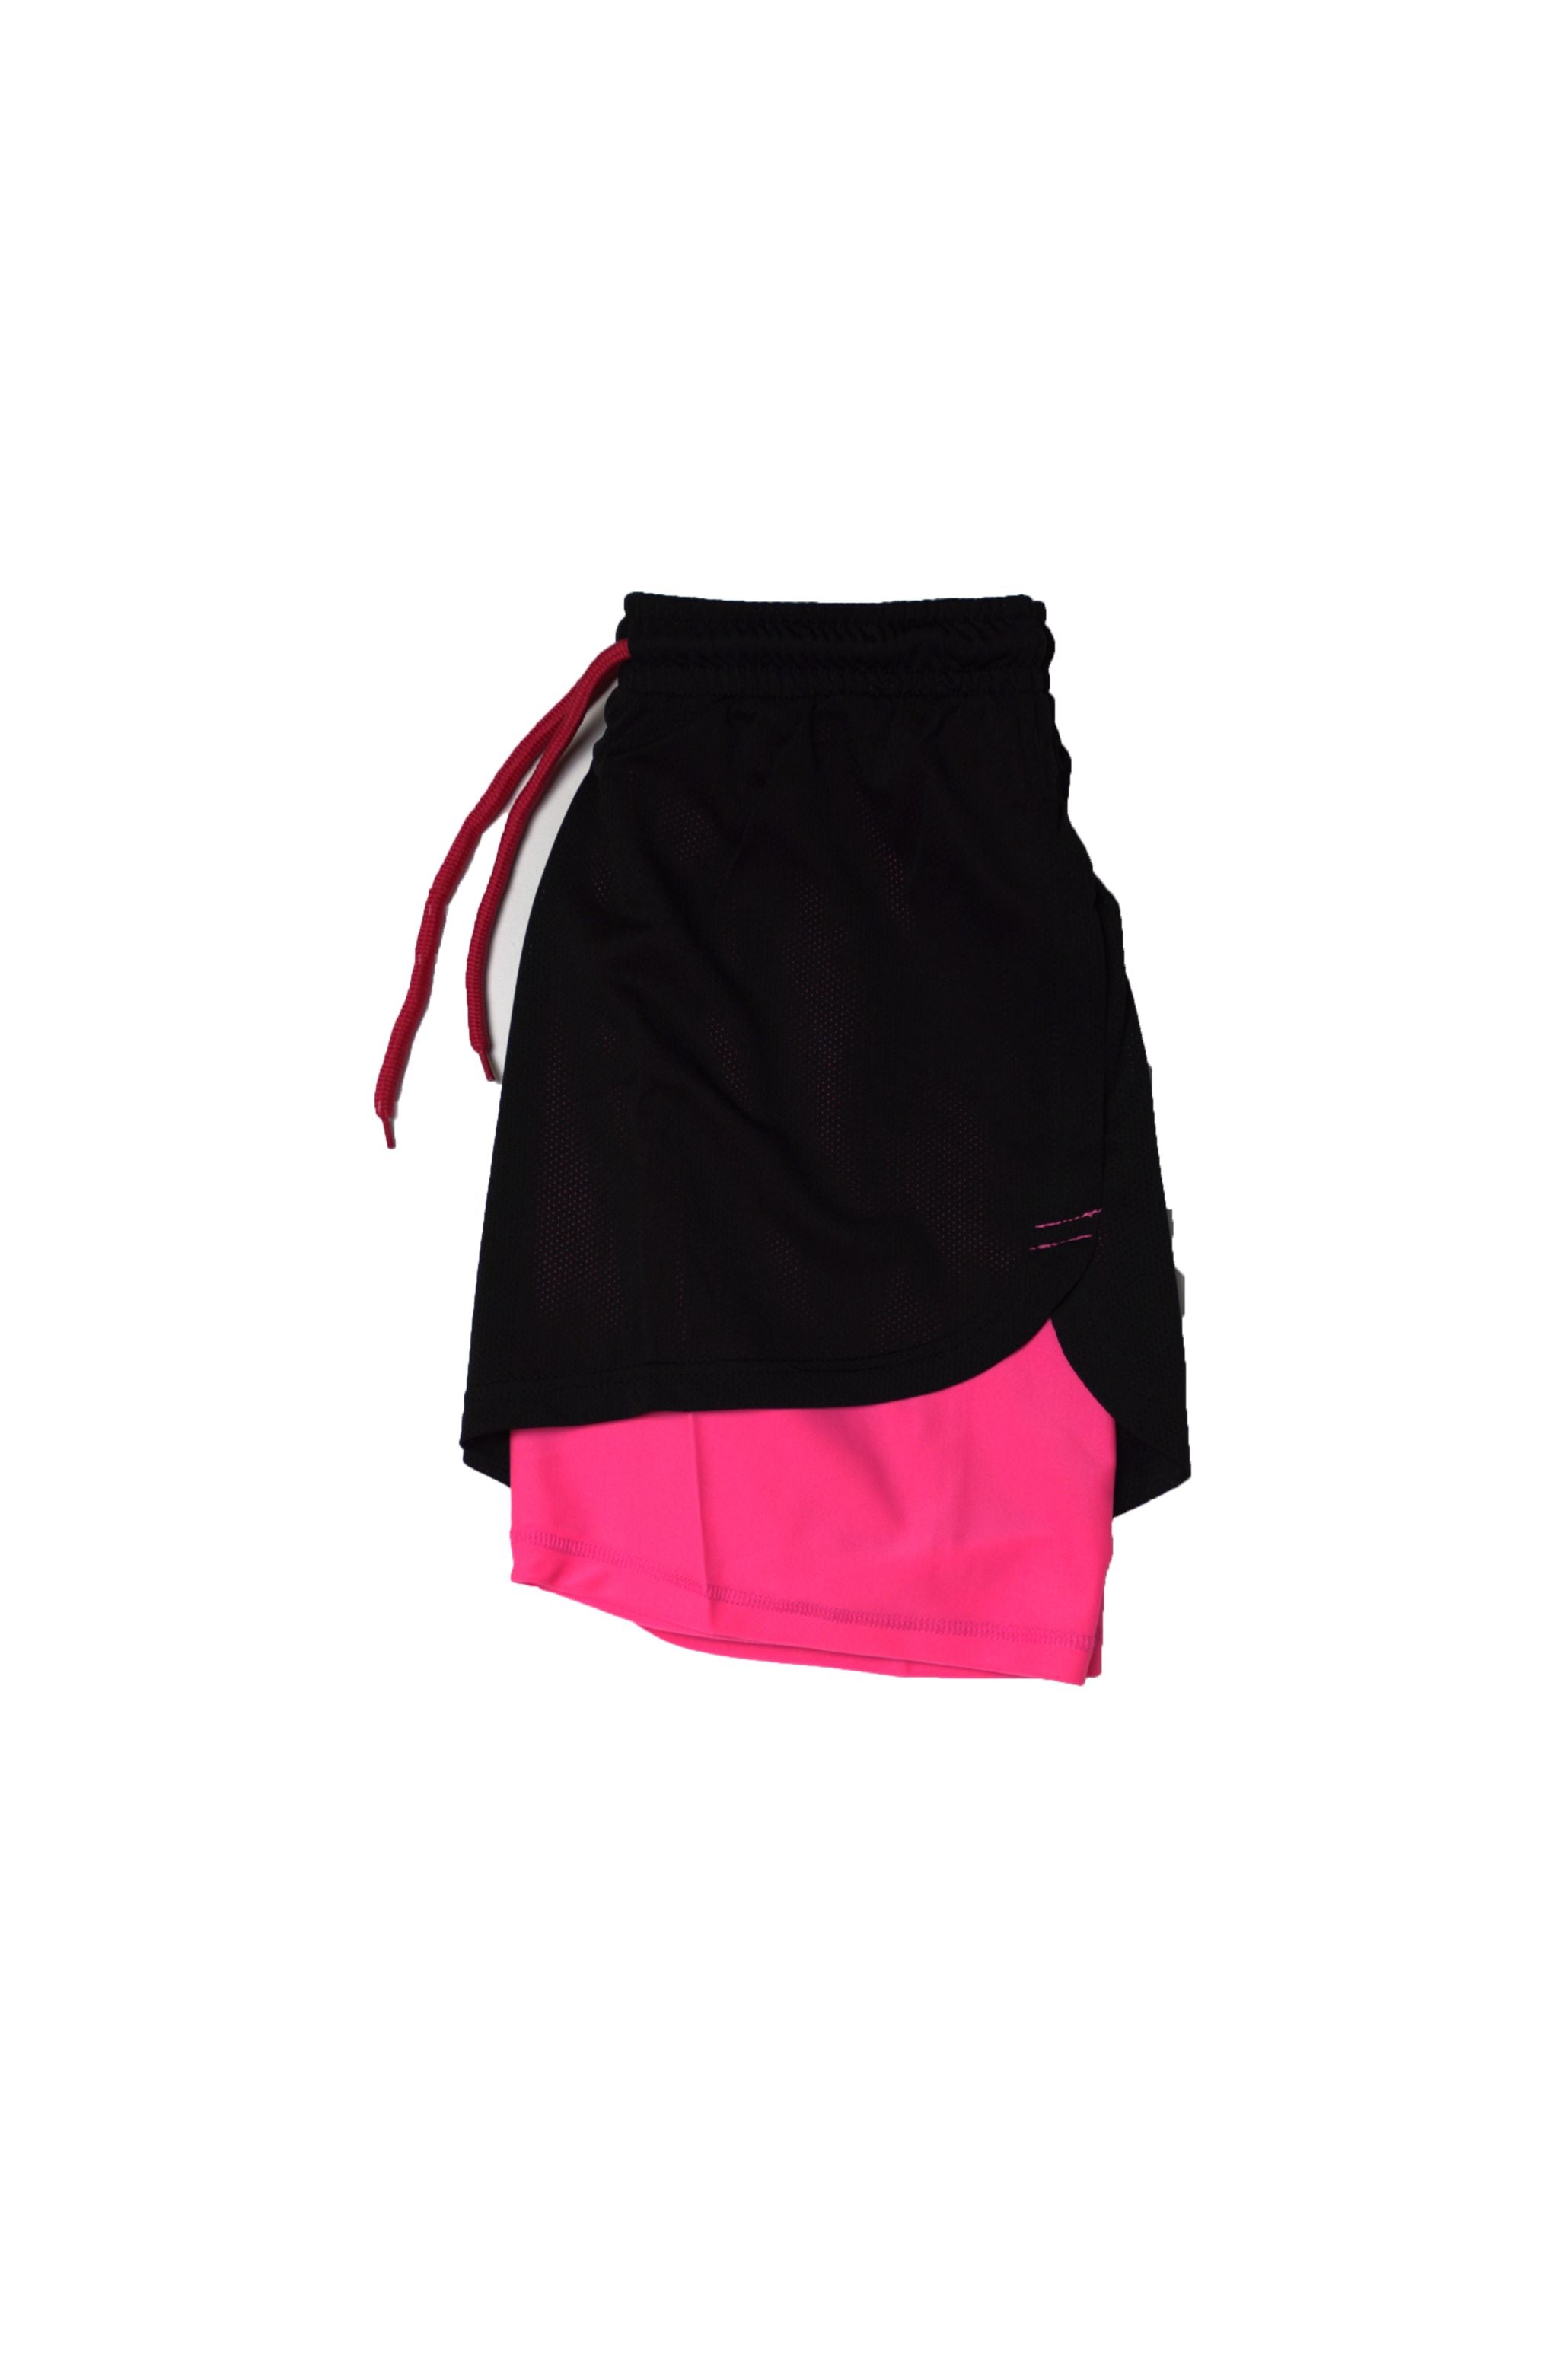 WOMEN FITNESS SHORTS BLACK AND PINK